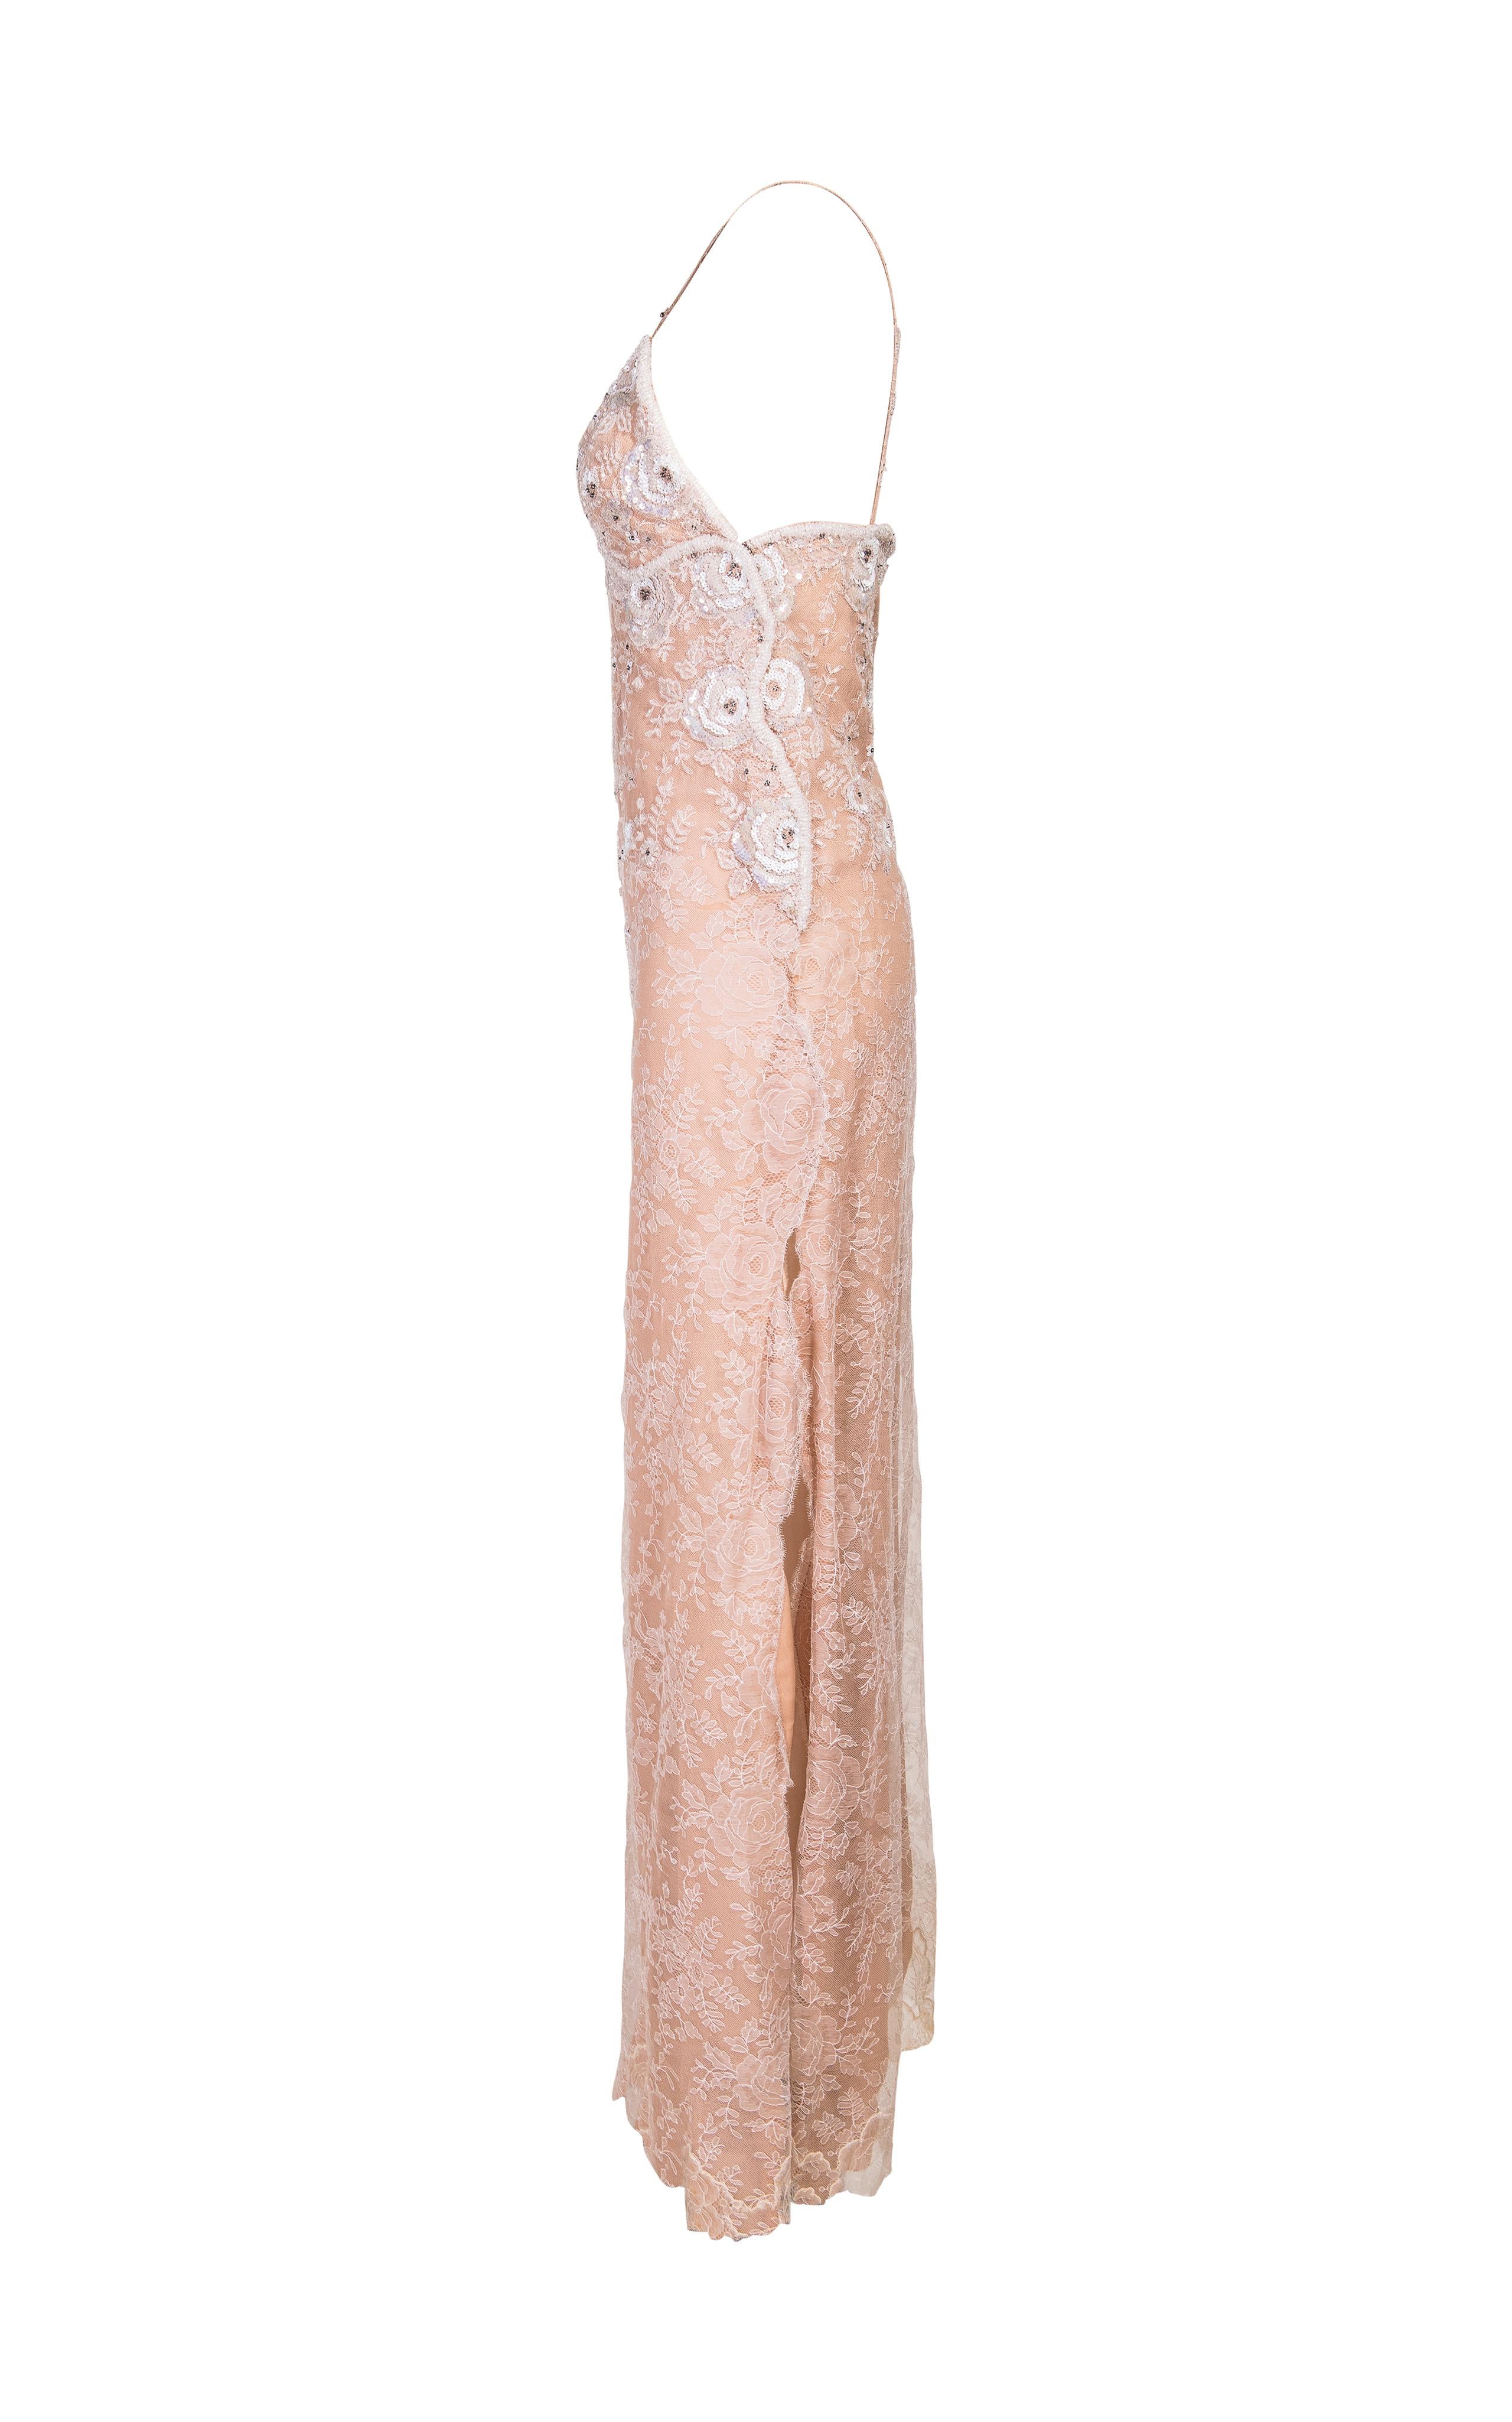 1970's James Galanos lace hand-embellished gown. Peach gown with white lace overlay and hand-embellished sequin and beaded floral details. Zig-zag snap button closures on side add special detail.